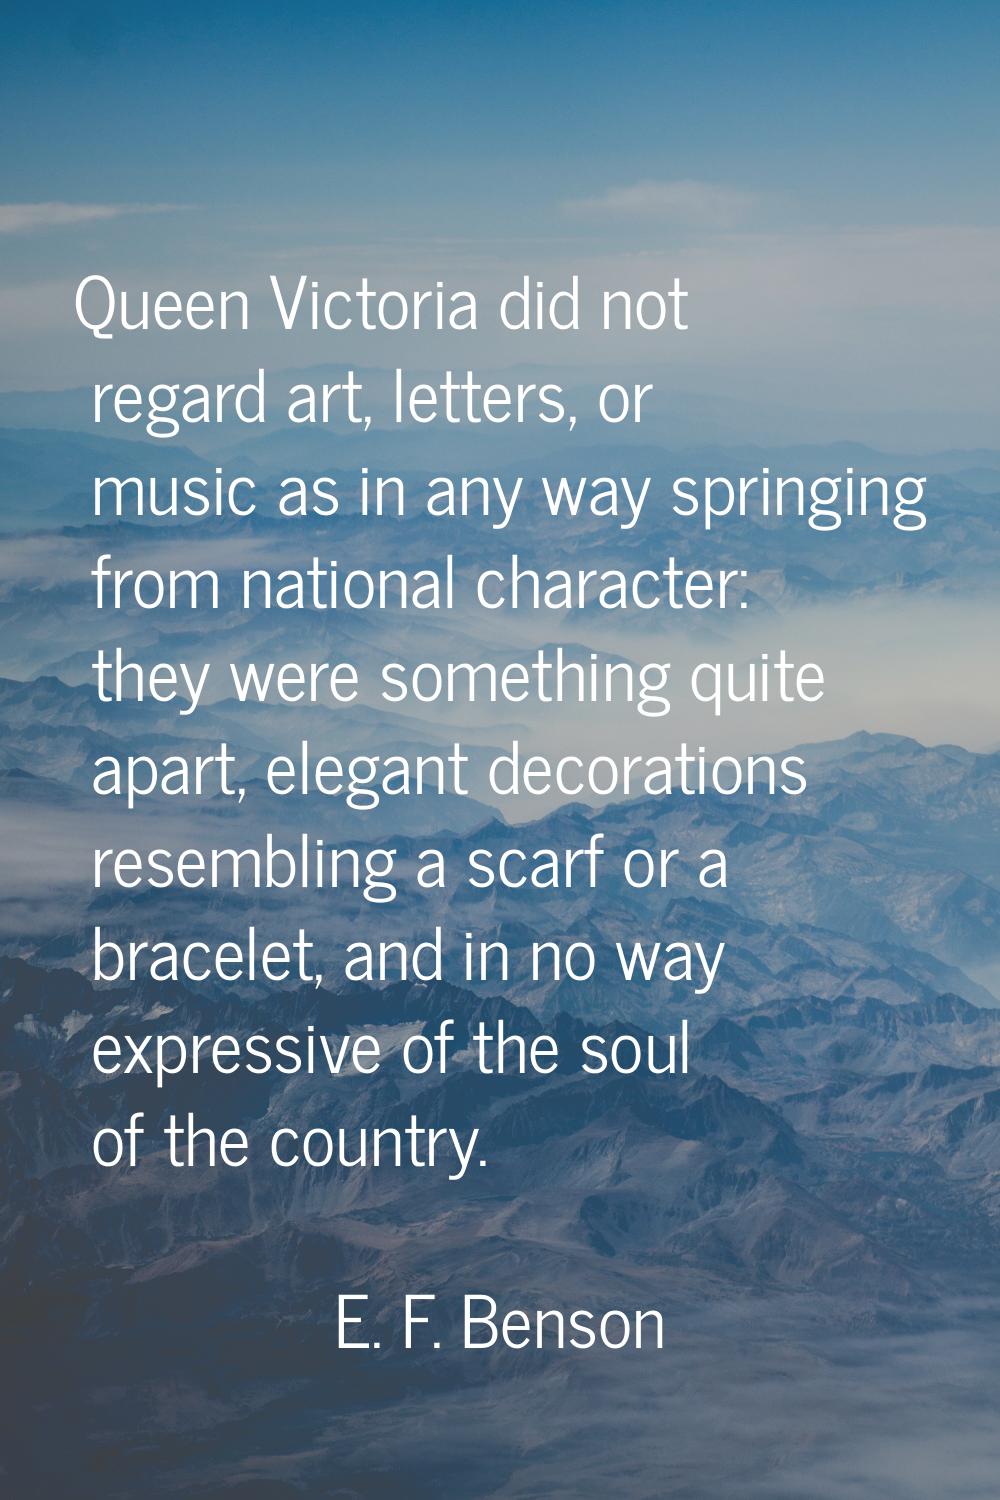 Queen Victoria did not regard art, letters, or music as in any way springing from national characte